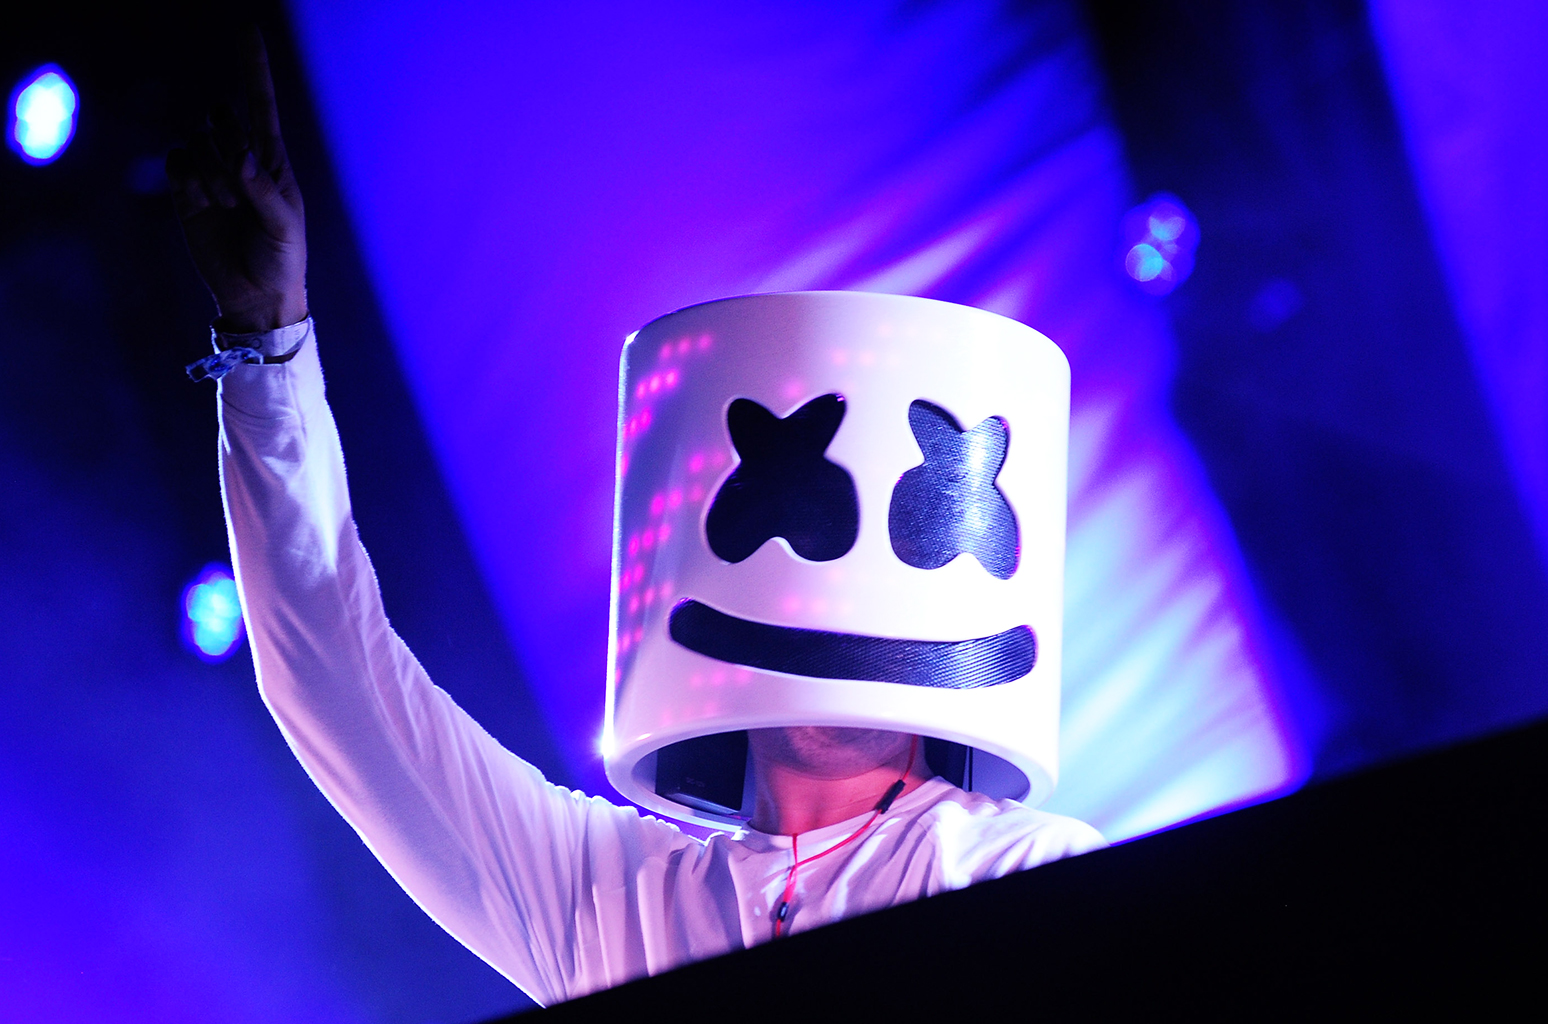 Free Download Marshmello Wallpaper Full Hd Pictures 1548x1024